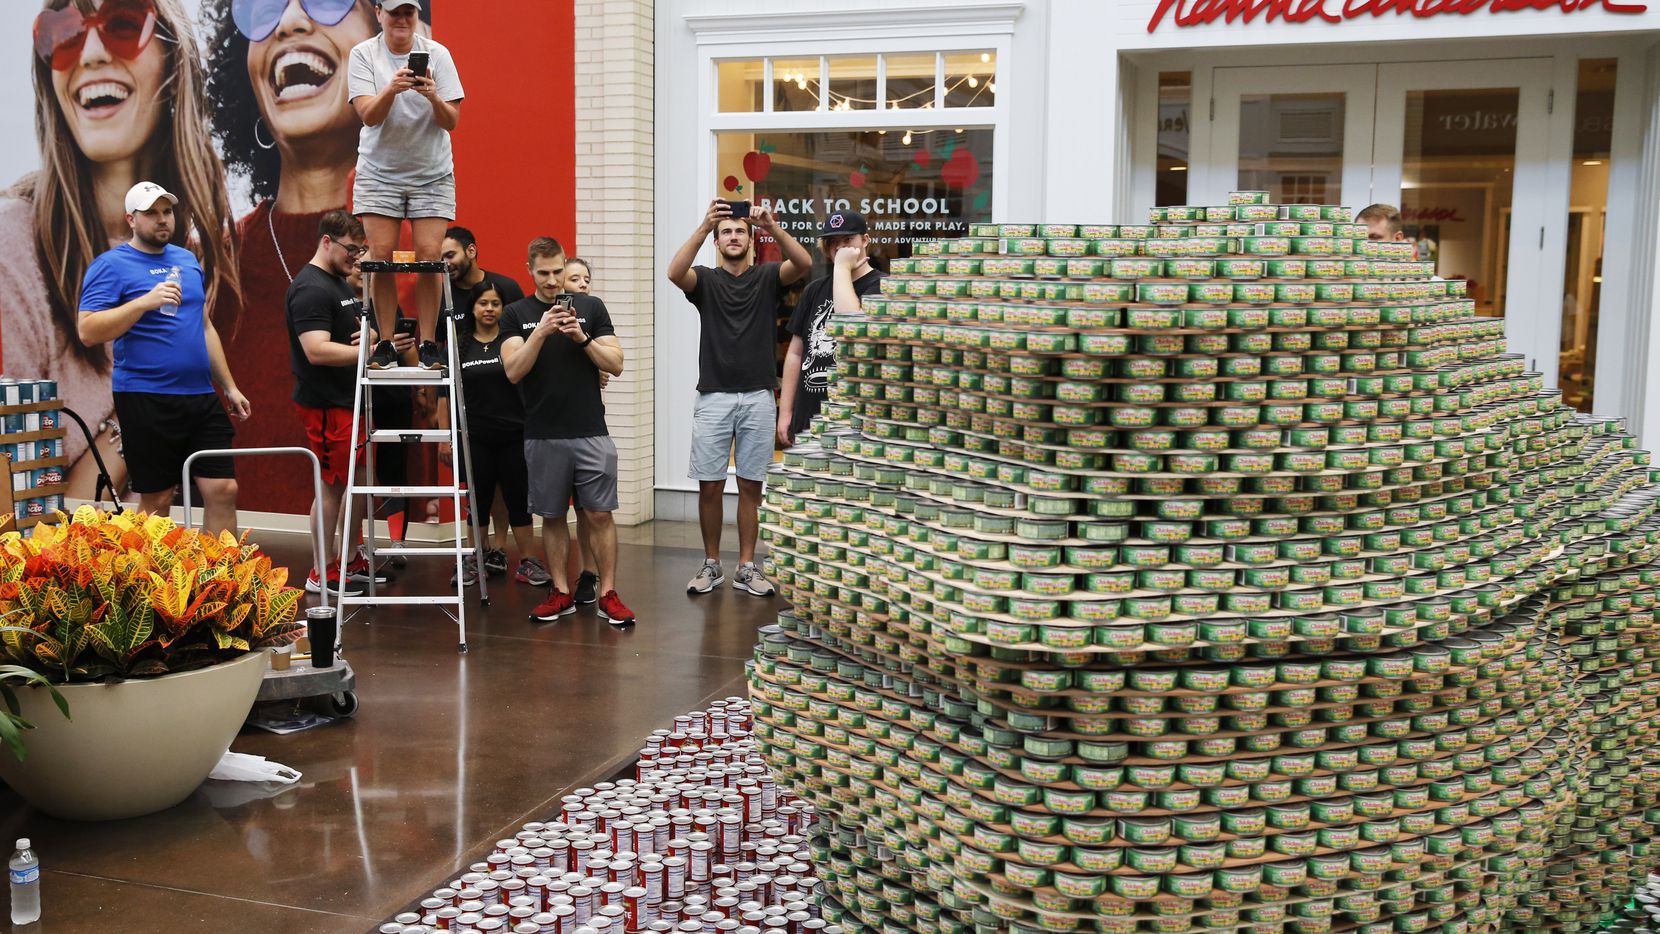 Shellie Gaffron of Ridgemont Commercial Construction uses a ladder to take a photo of the completed project as the company  teamed up with Boka Powell during the Canstruction charity event at NorthPark Center in Dallas in 2019.